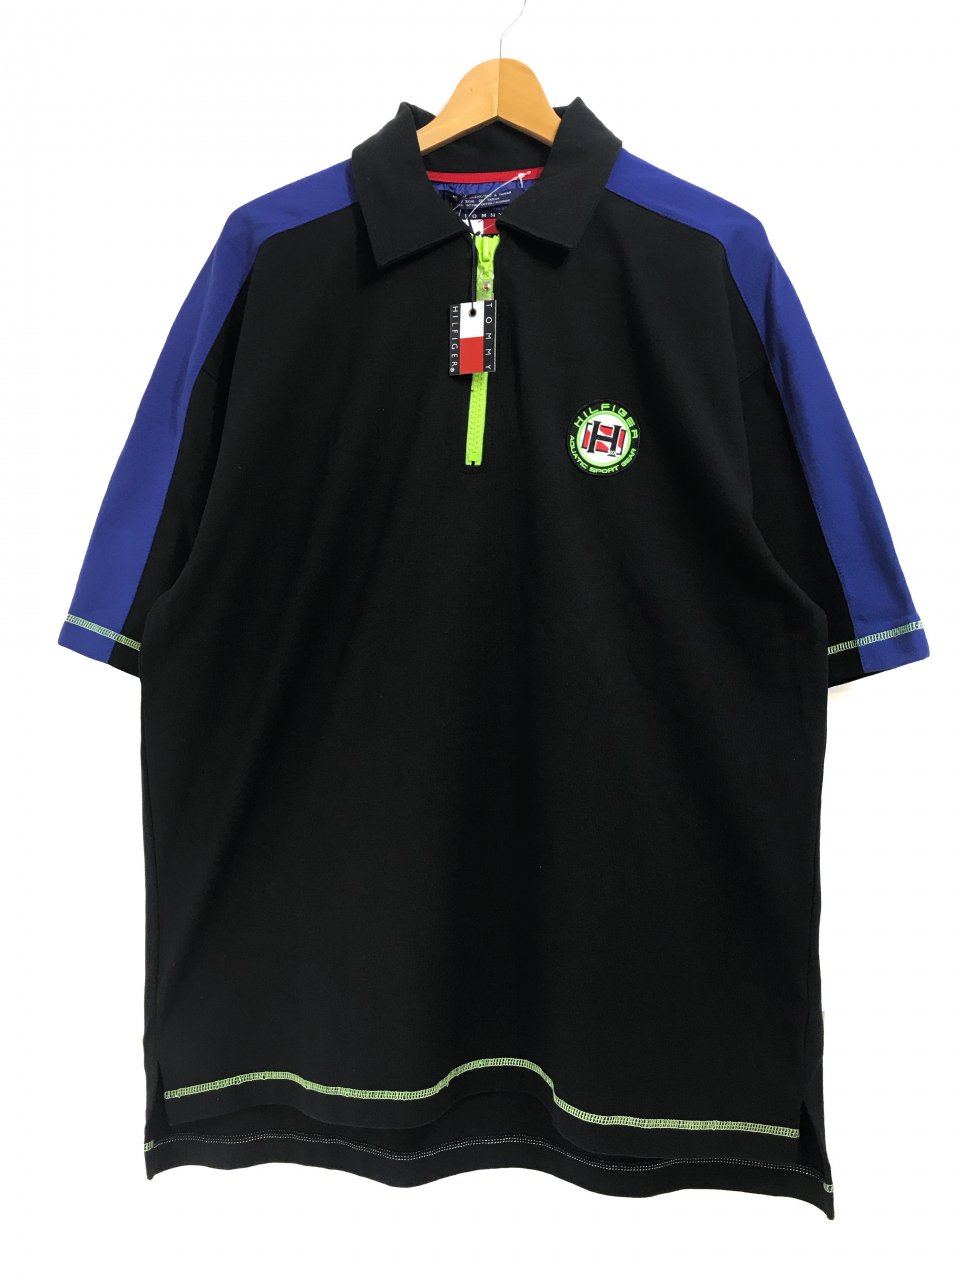 Deadstock 90s TOMMY HILFIGER "AQUATIC SPORT GEAR" S/S Polo Shirts 黒青 XL  デッドストック トミーヒルフィガー 半袖 ポロシャツ - NEWJOKE ONLINE STORE